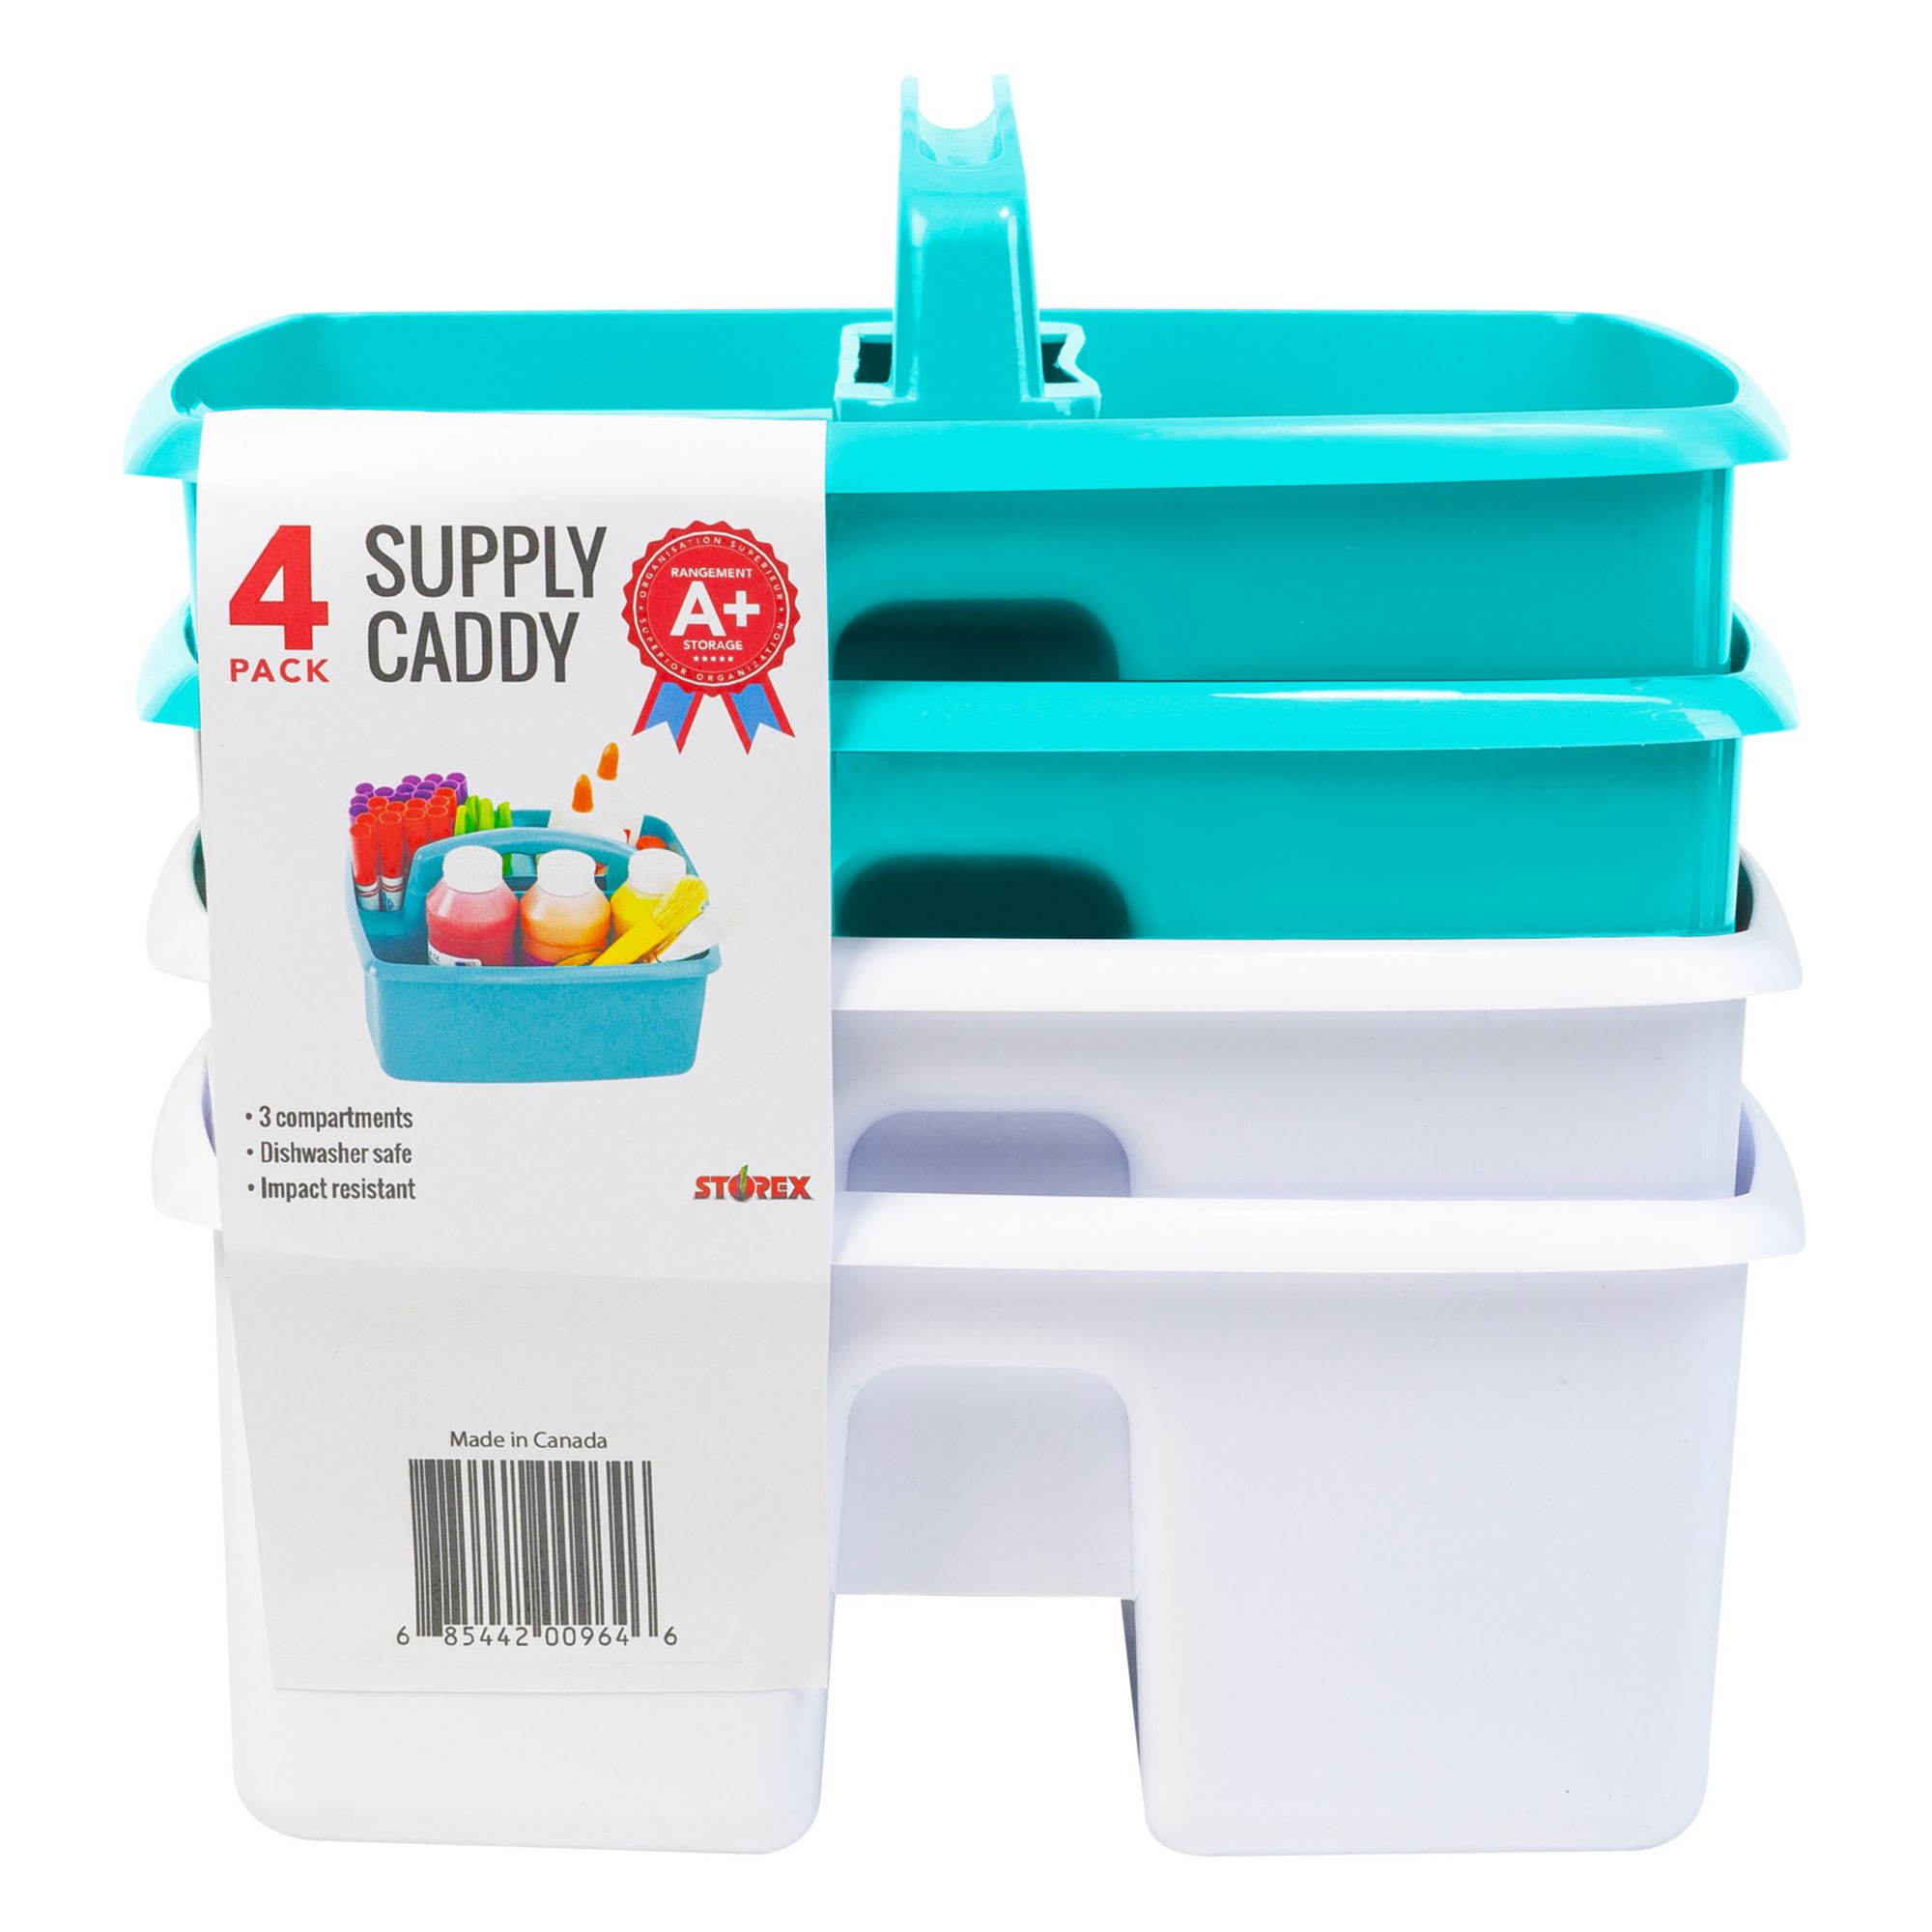 Storex Three-Compartment 4-Pk. Supply Caddy - Assorted Colors